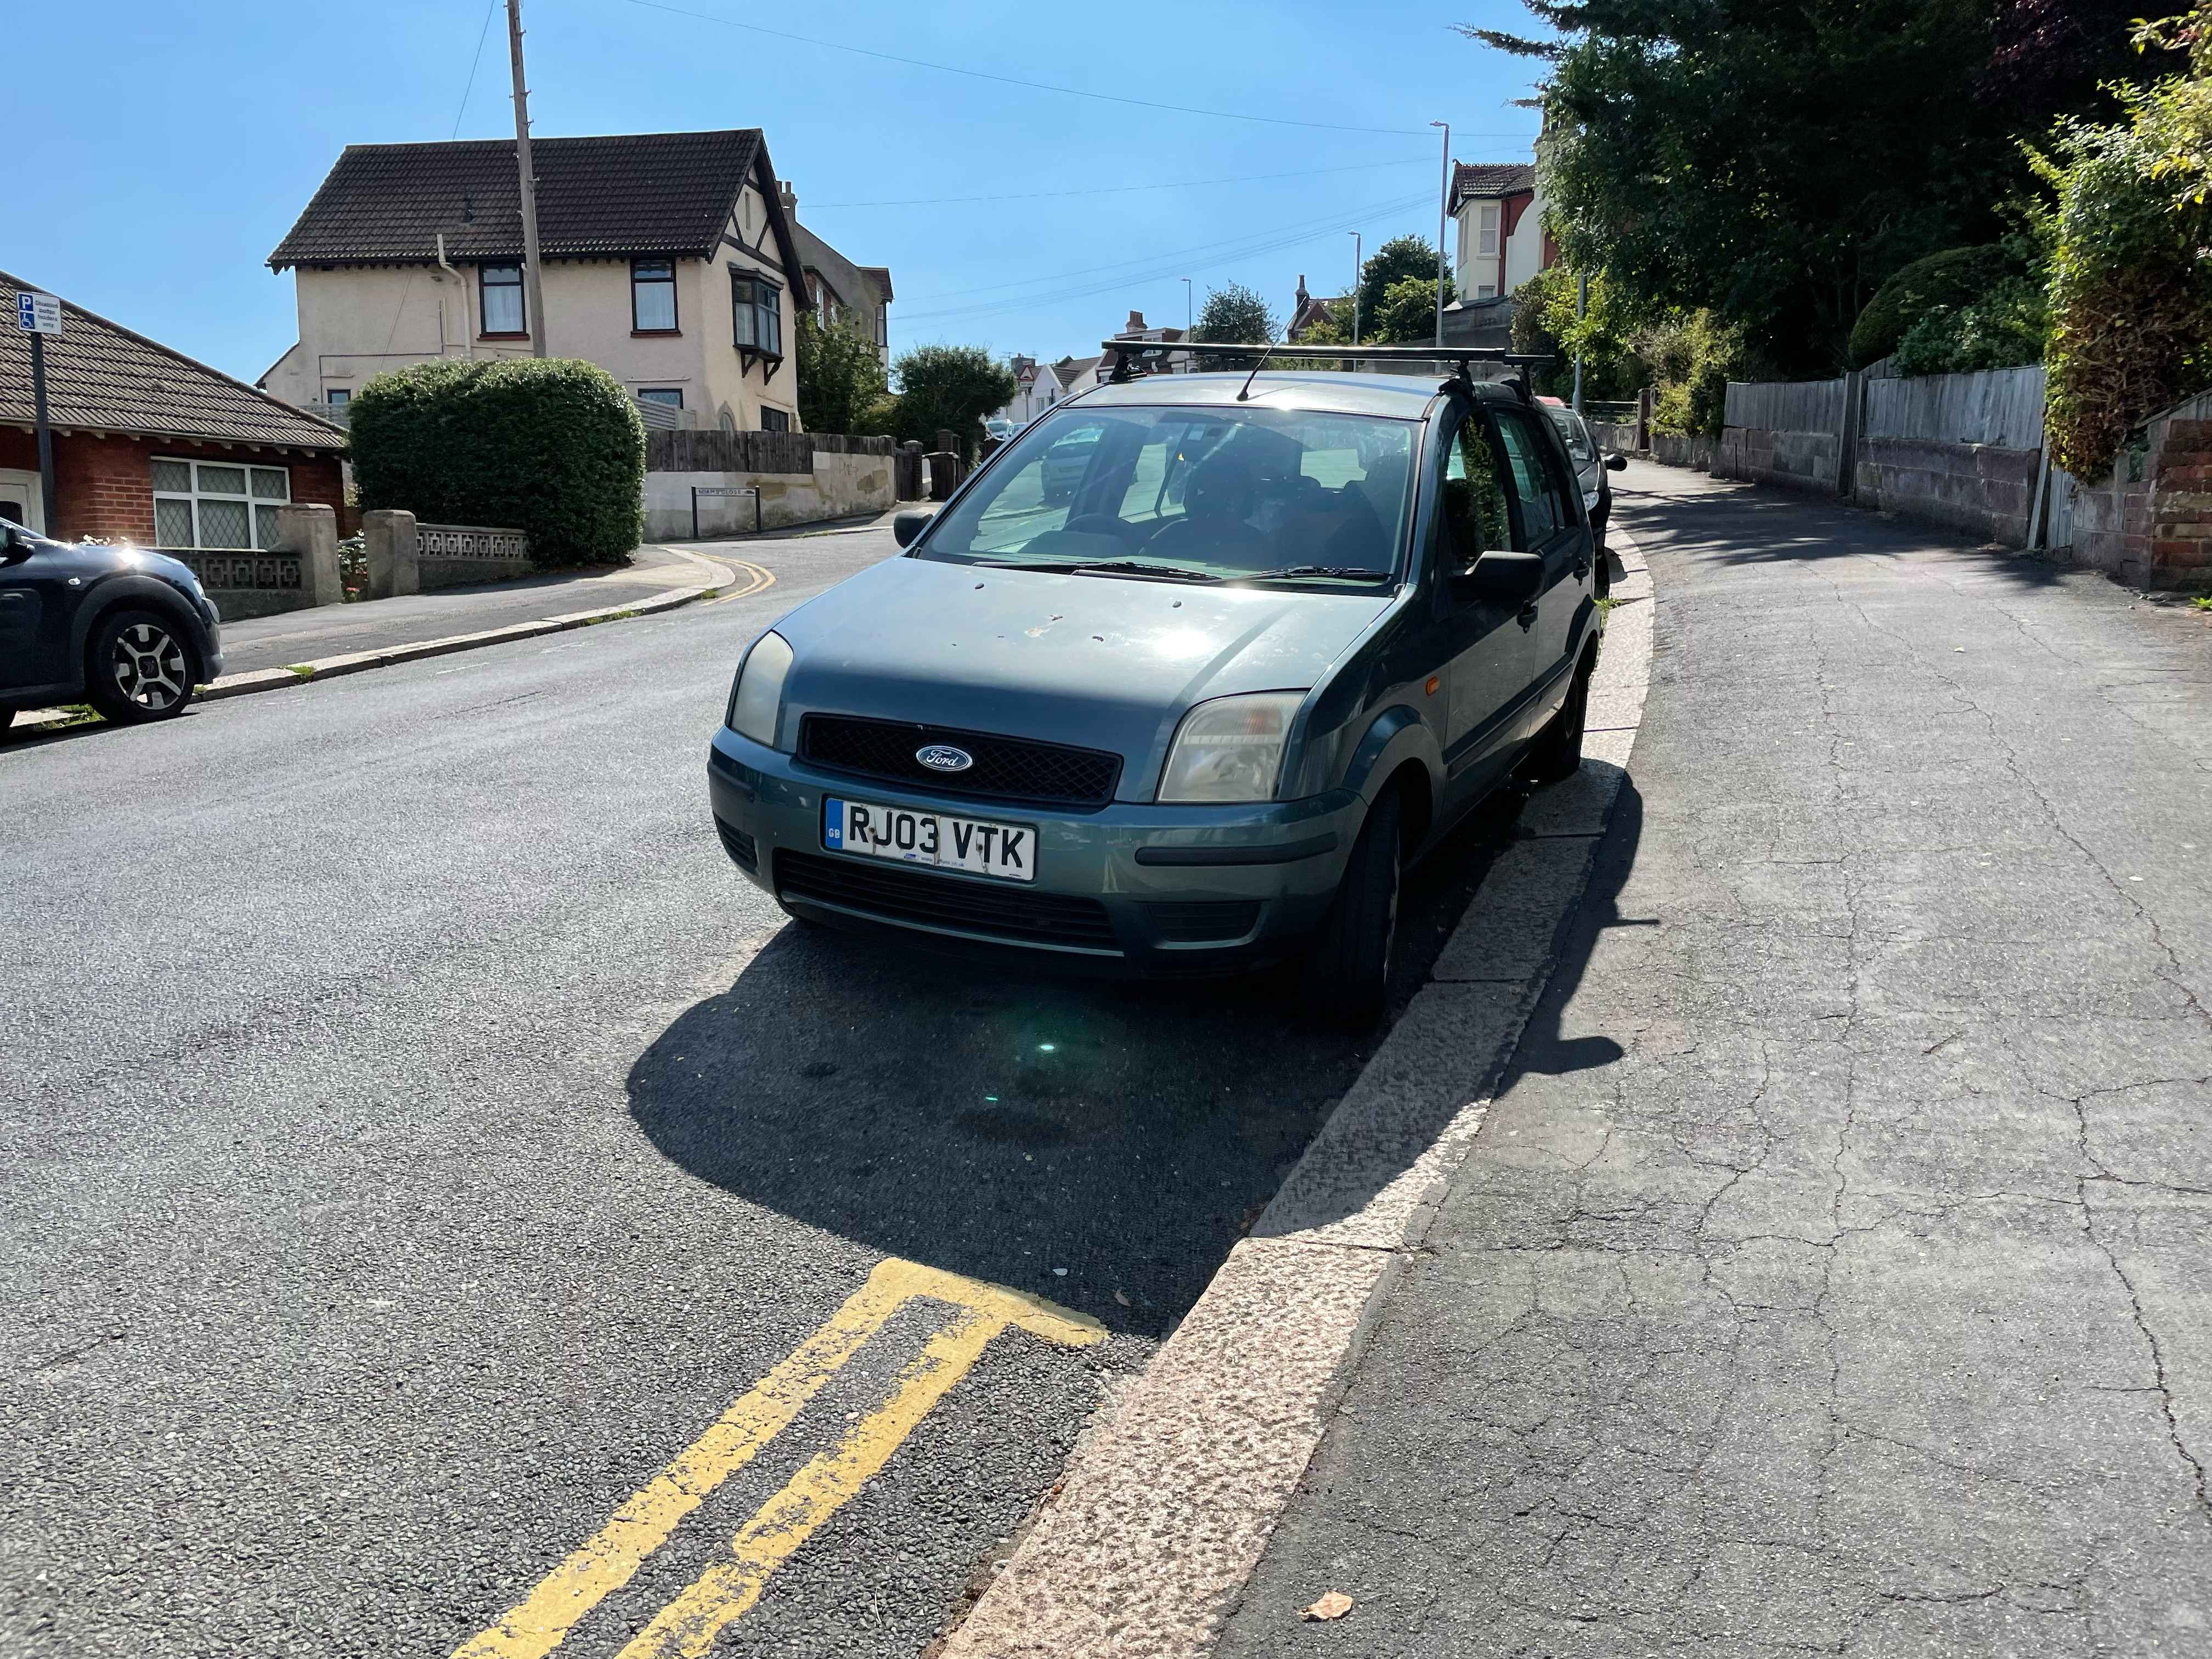 Photograph of RJ03 VTK - a Green Ford Fusion parked in Hollingdean by a non-resident. The first of five photographs supplied by the residents of Hollingdean.